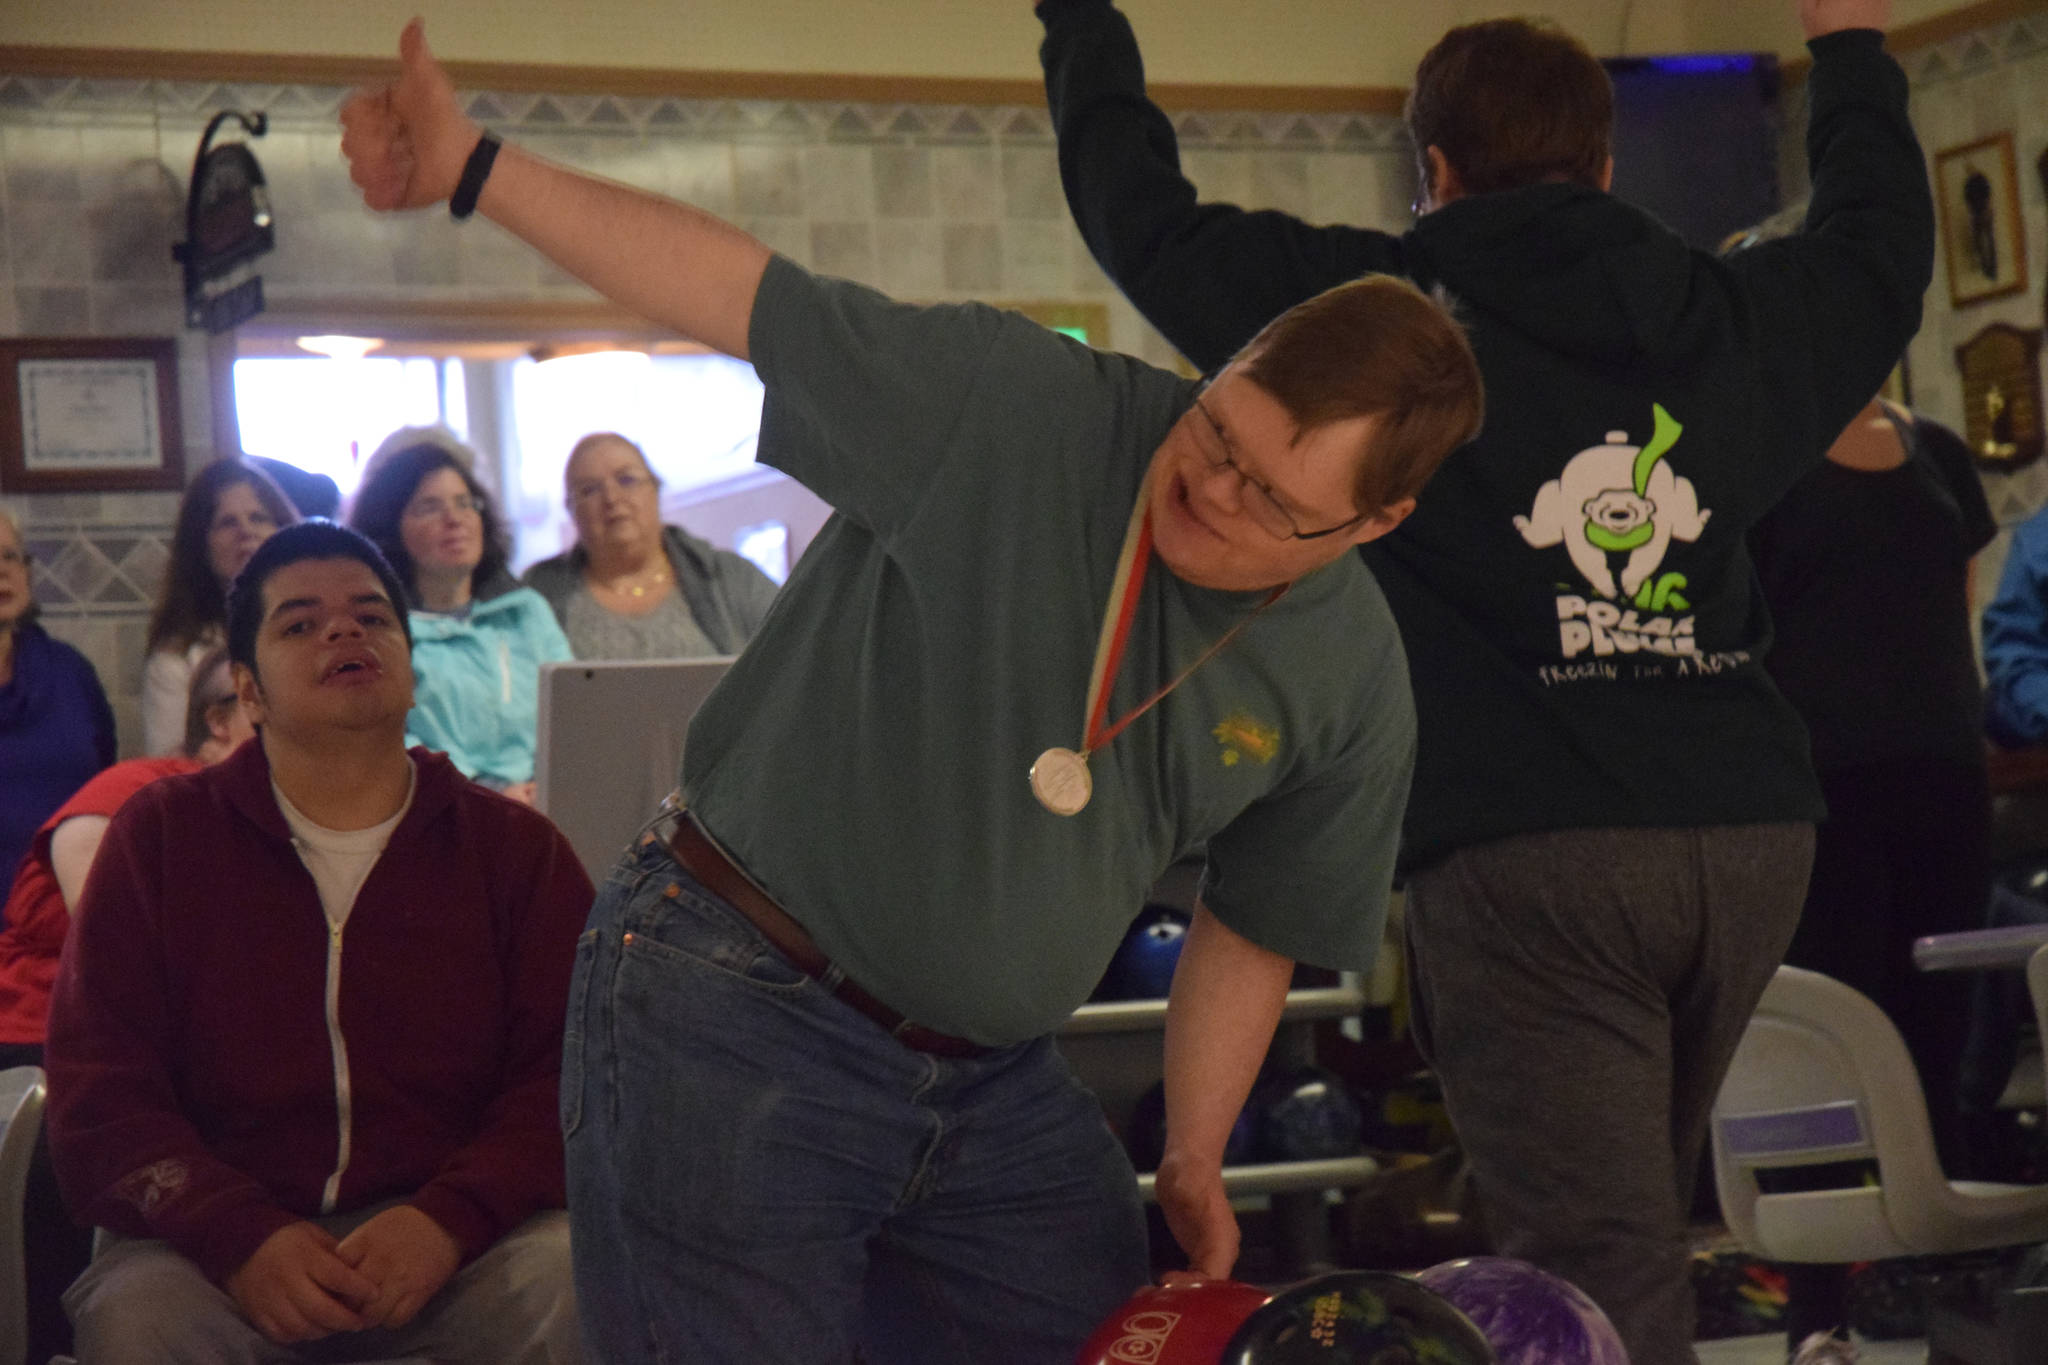 Athlete Carl Cogland Behnert gives a thumbs up to his Special Olympics teammates at Taku Lanes on Sunday, Oct. 15. (Kevin Gullufsen | Juneau Empire)